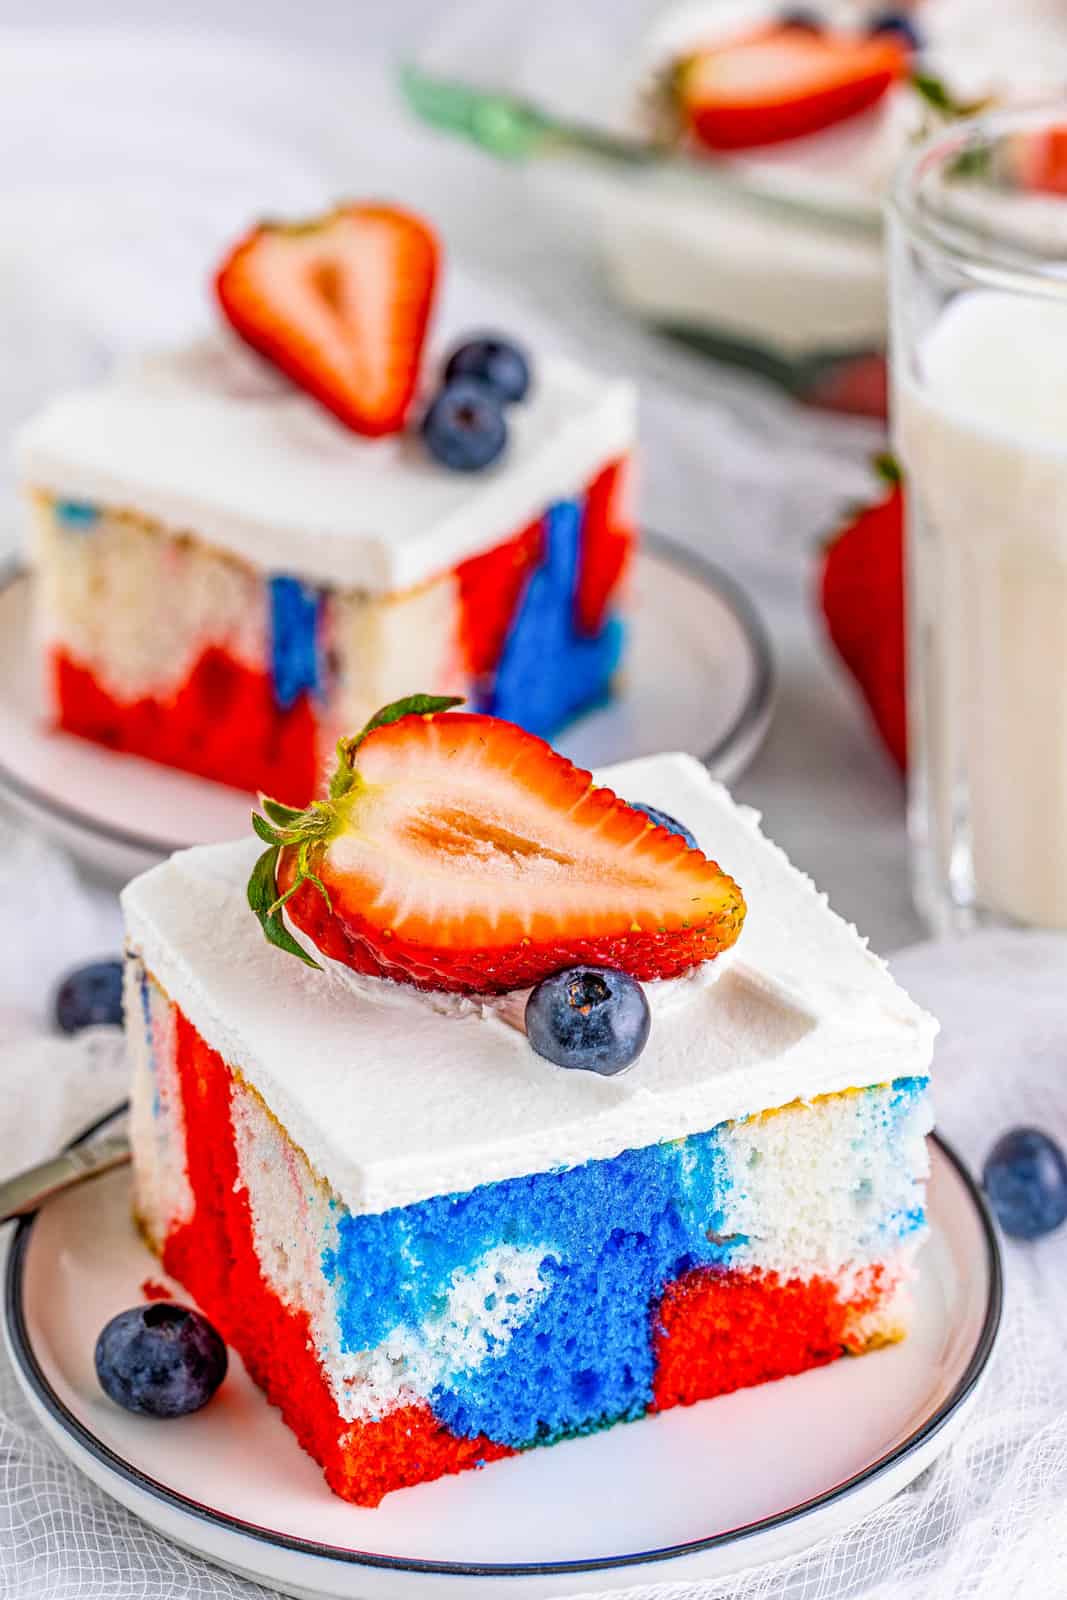 Two slices of Tie Dye 4th of July Cake on white plates topped with berries.